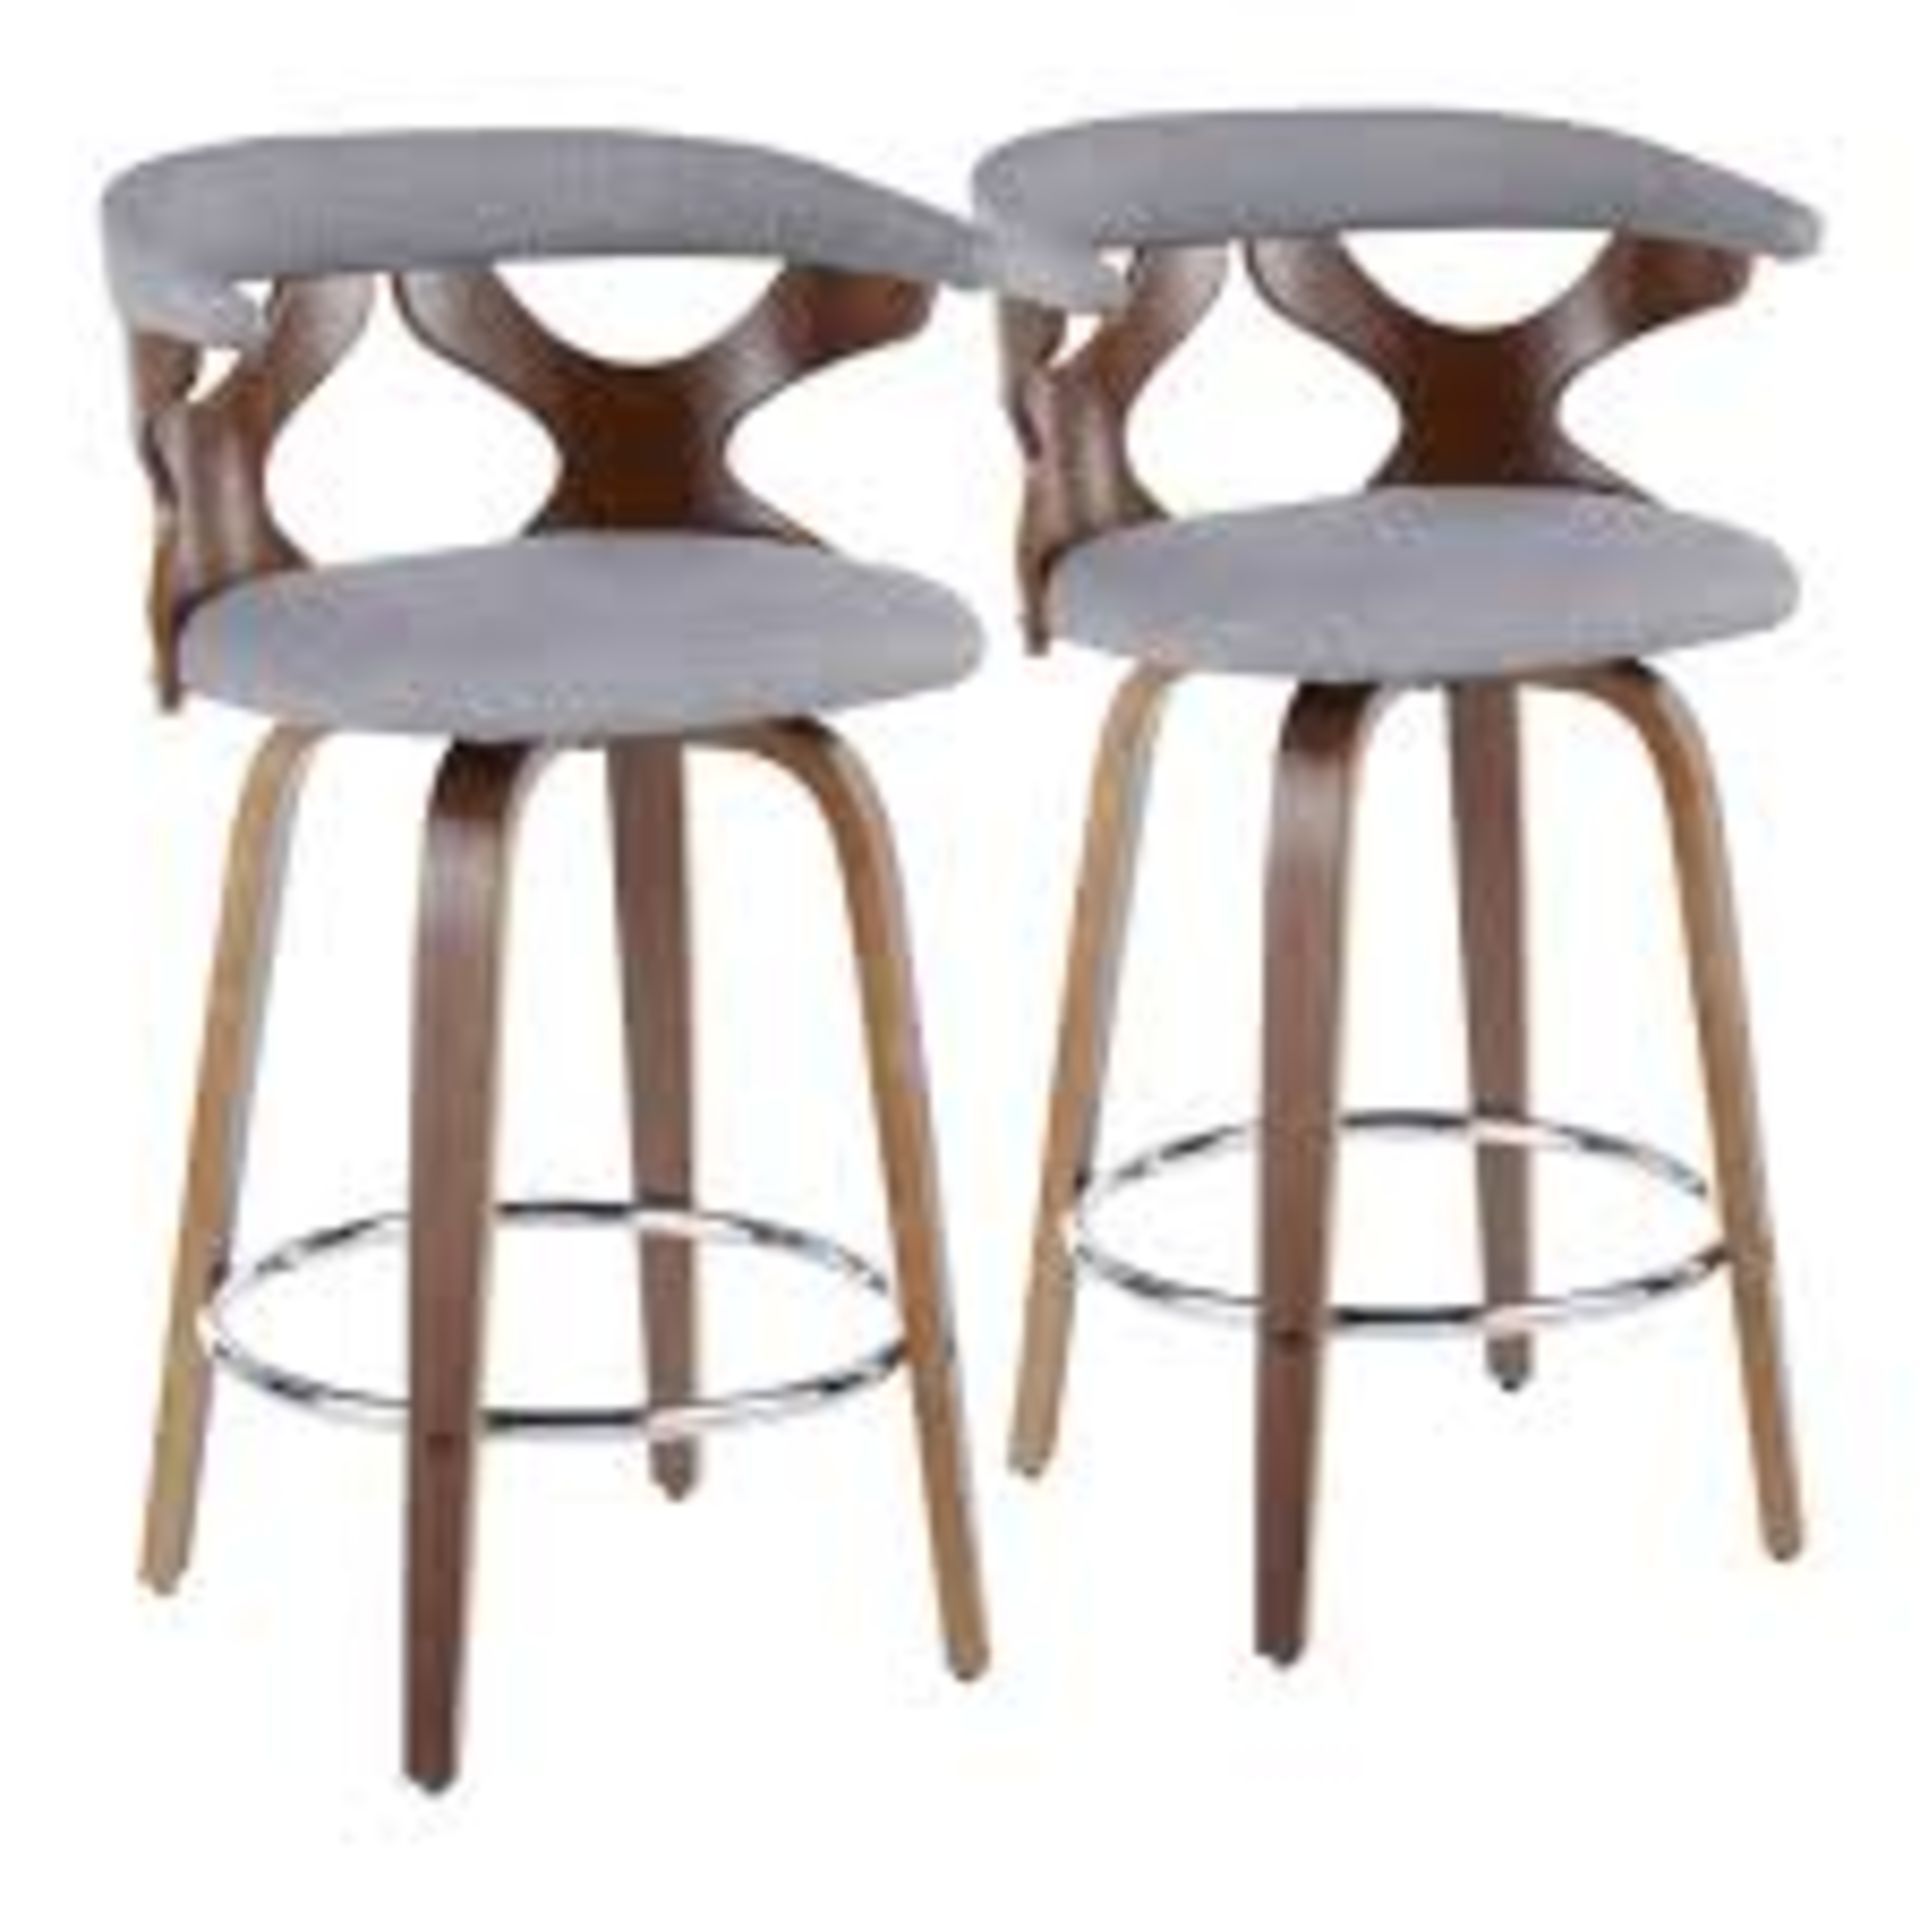 Lumee Source Chicago Turquoise and Walnut Designer Bar Stool RRP £125 (15031) (Public Viewing and